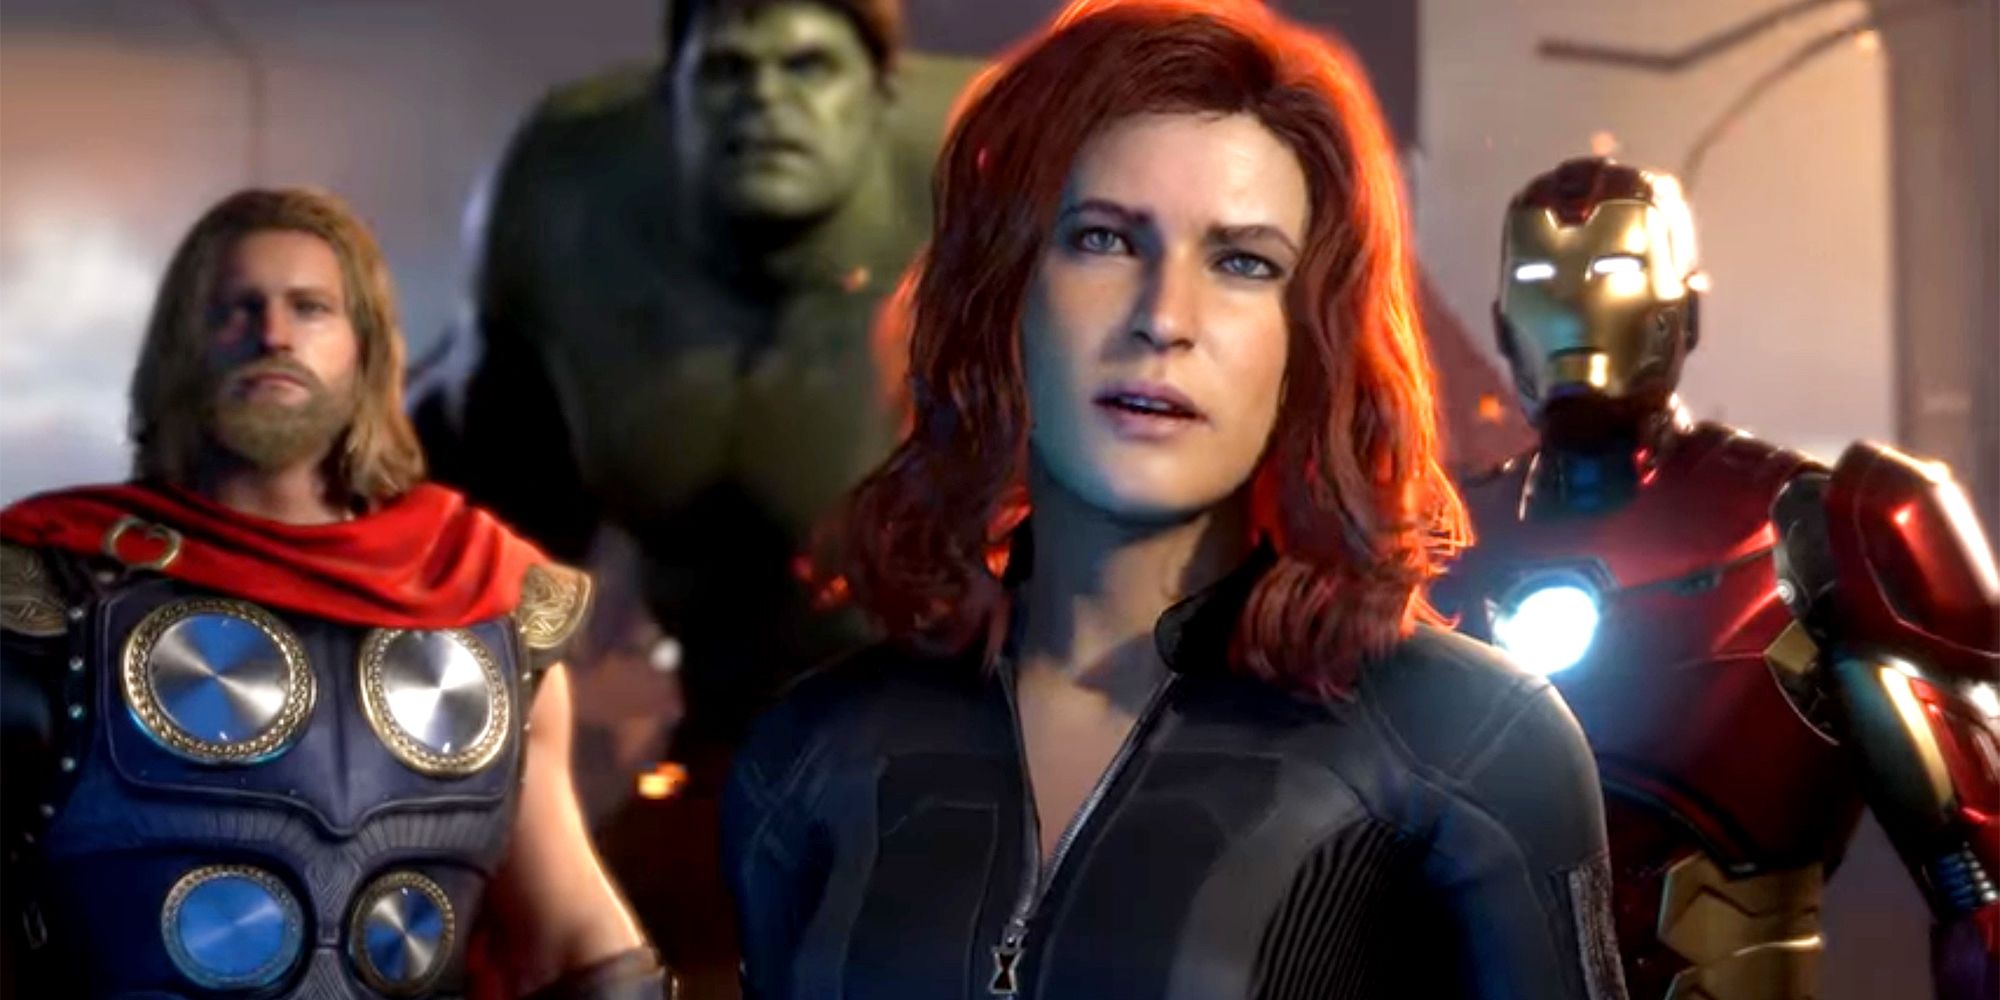 Black Widow looking past the camera appearing concerned in Marvel's Avengers, with Thor, Hulk, and Iron Man in the background.